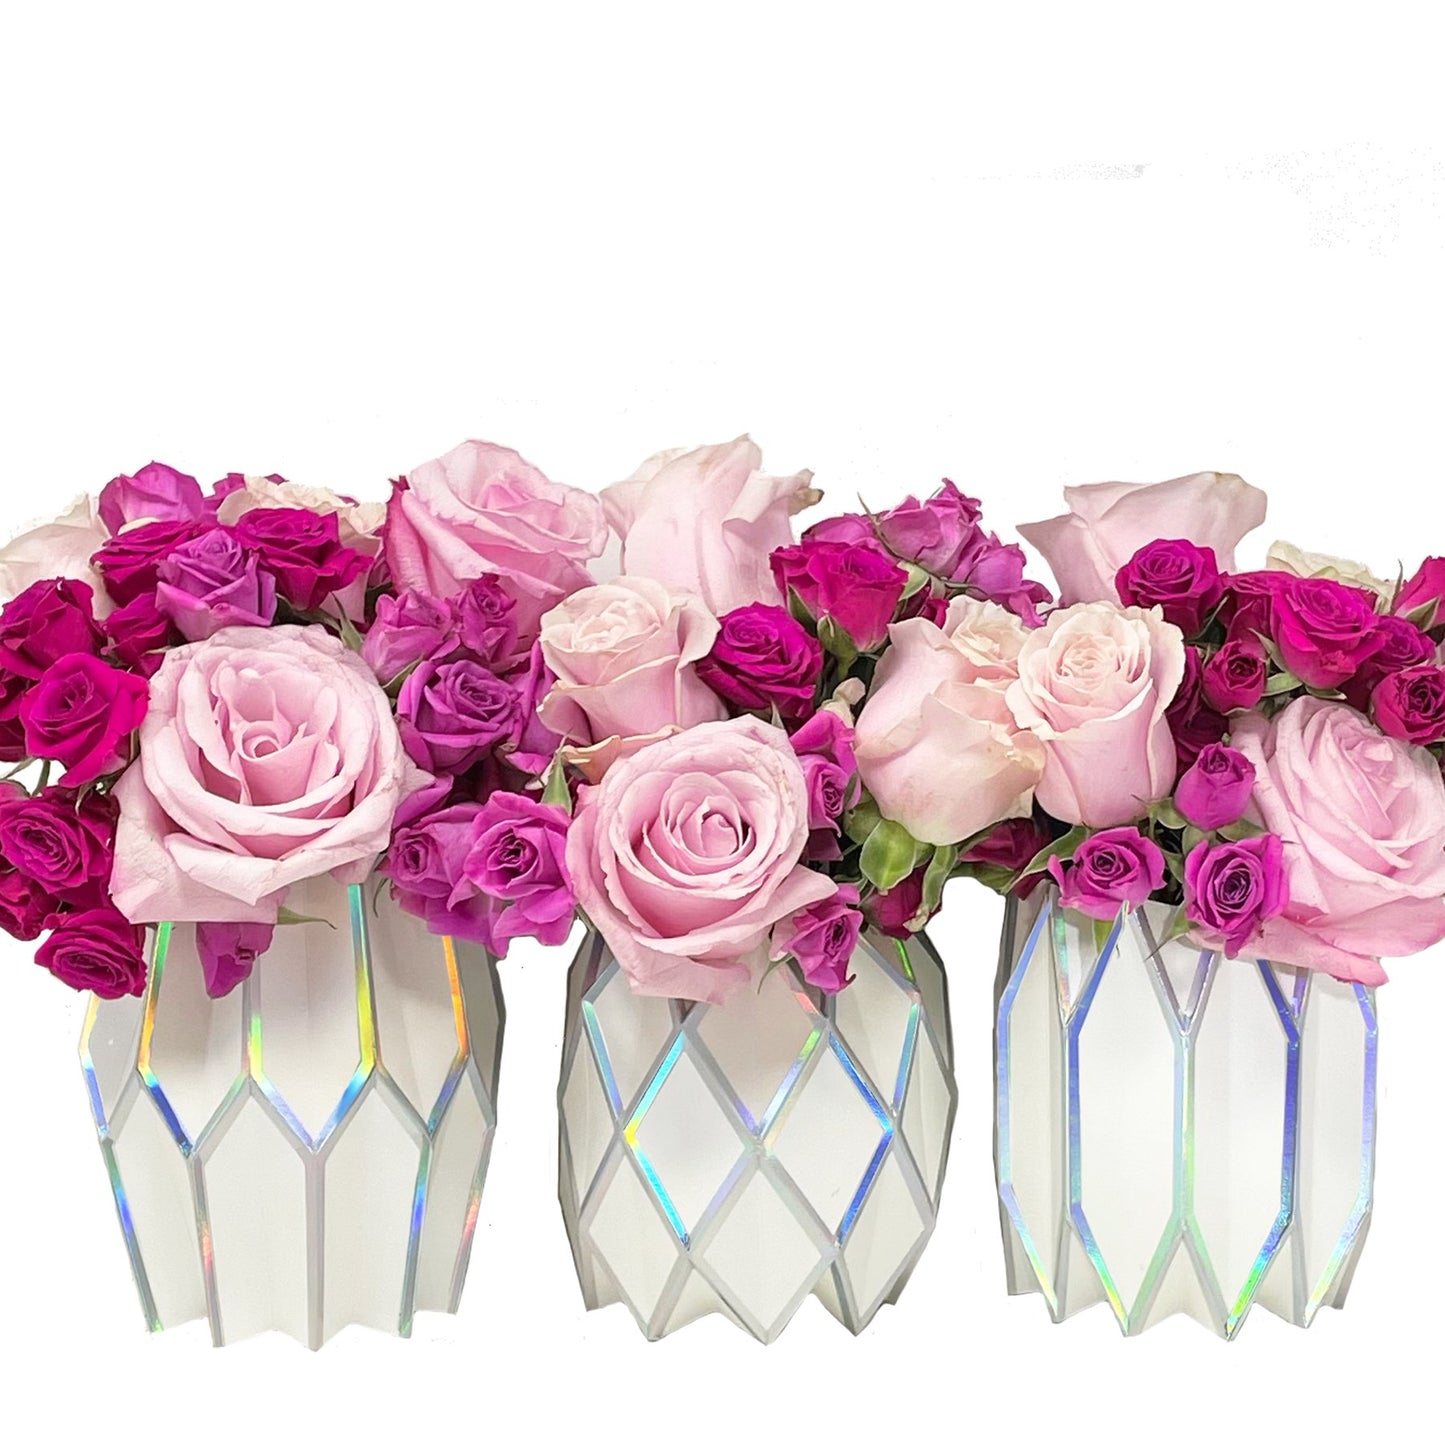 White paper vase with holographic accents and pink flowers